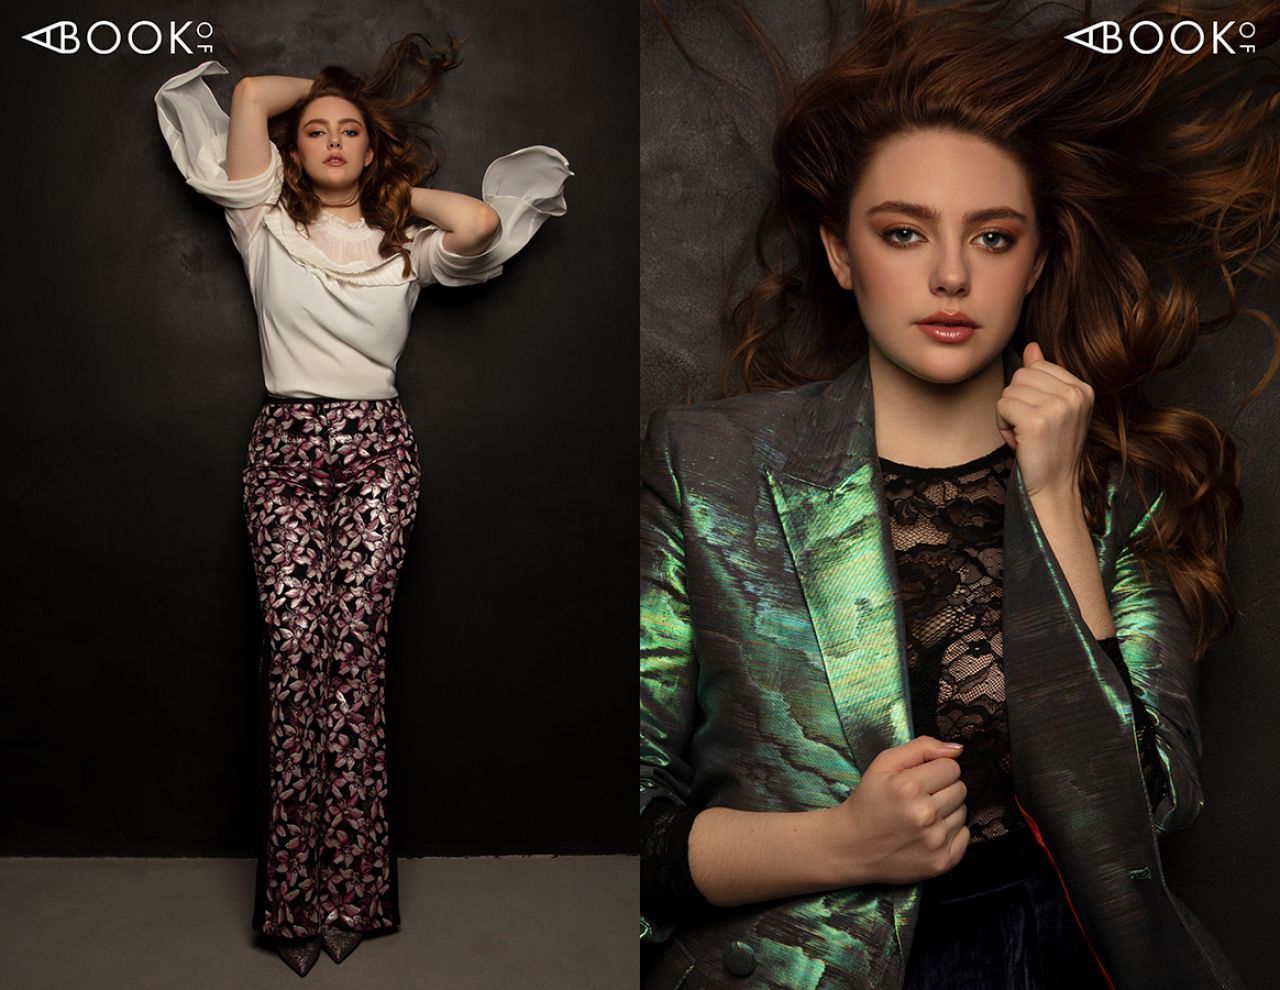 Danielle Rose Russell - Photoshoot for "A Book Of" 2019.